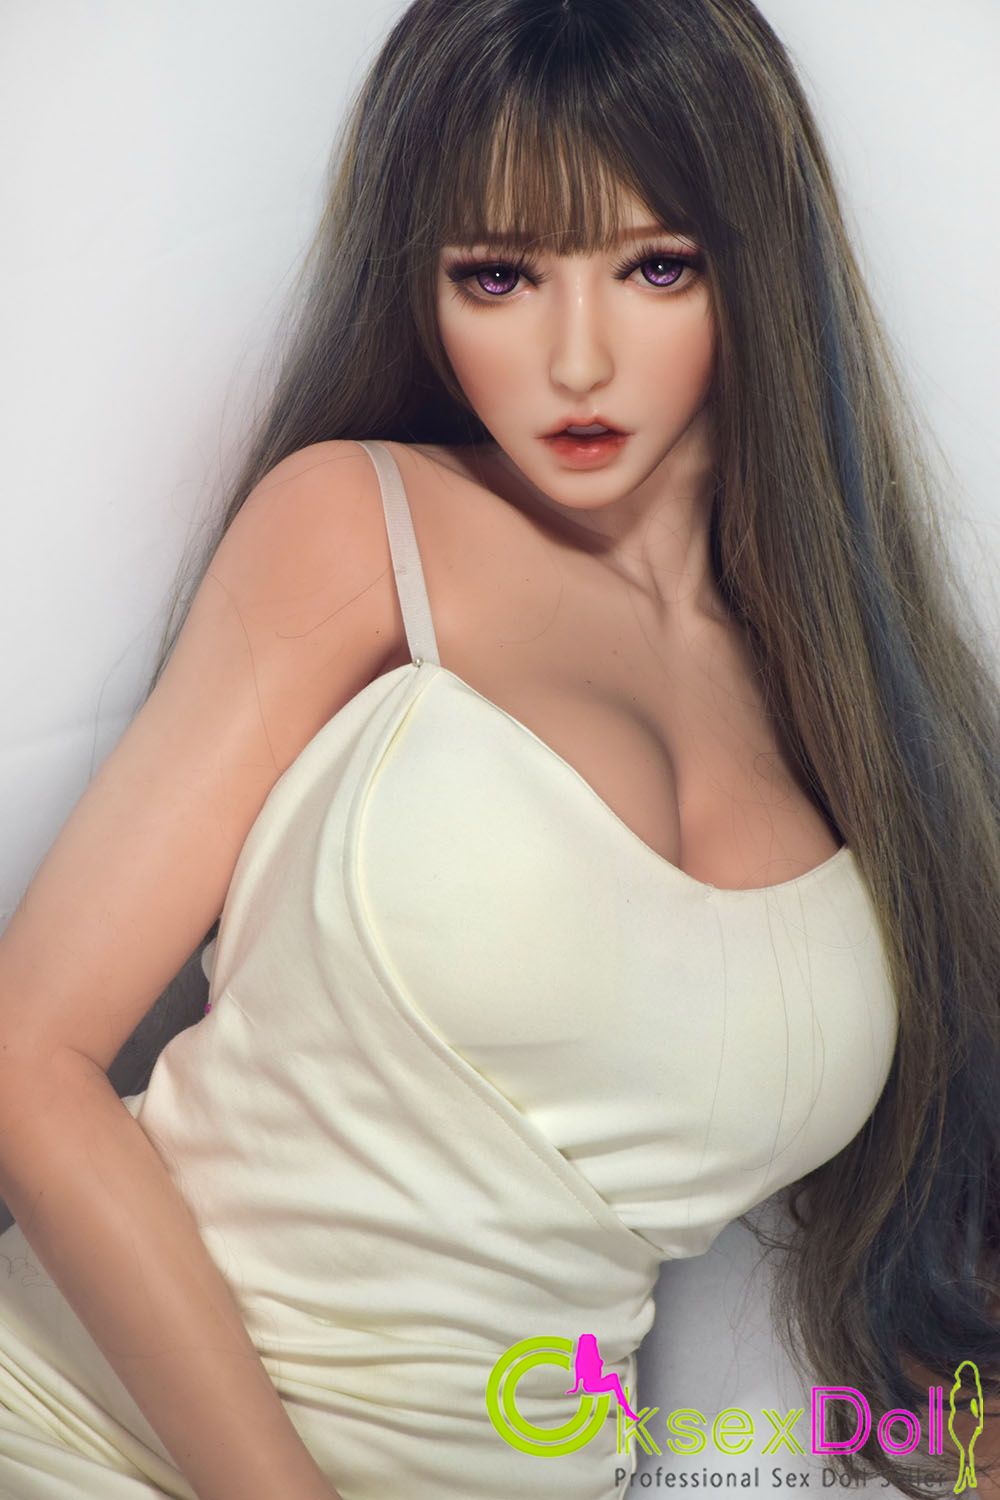 Big Boobs Doll images